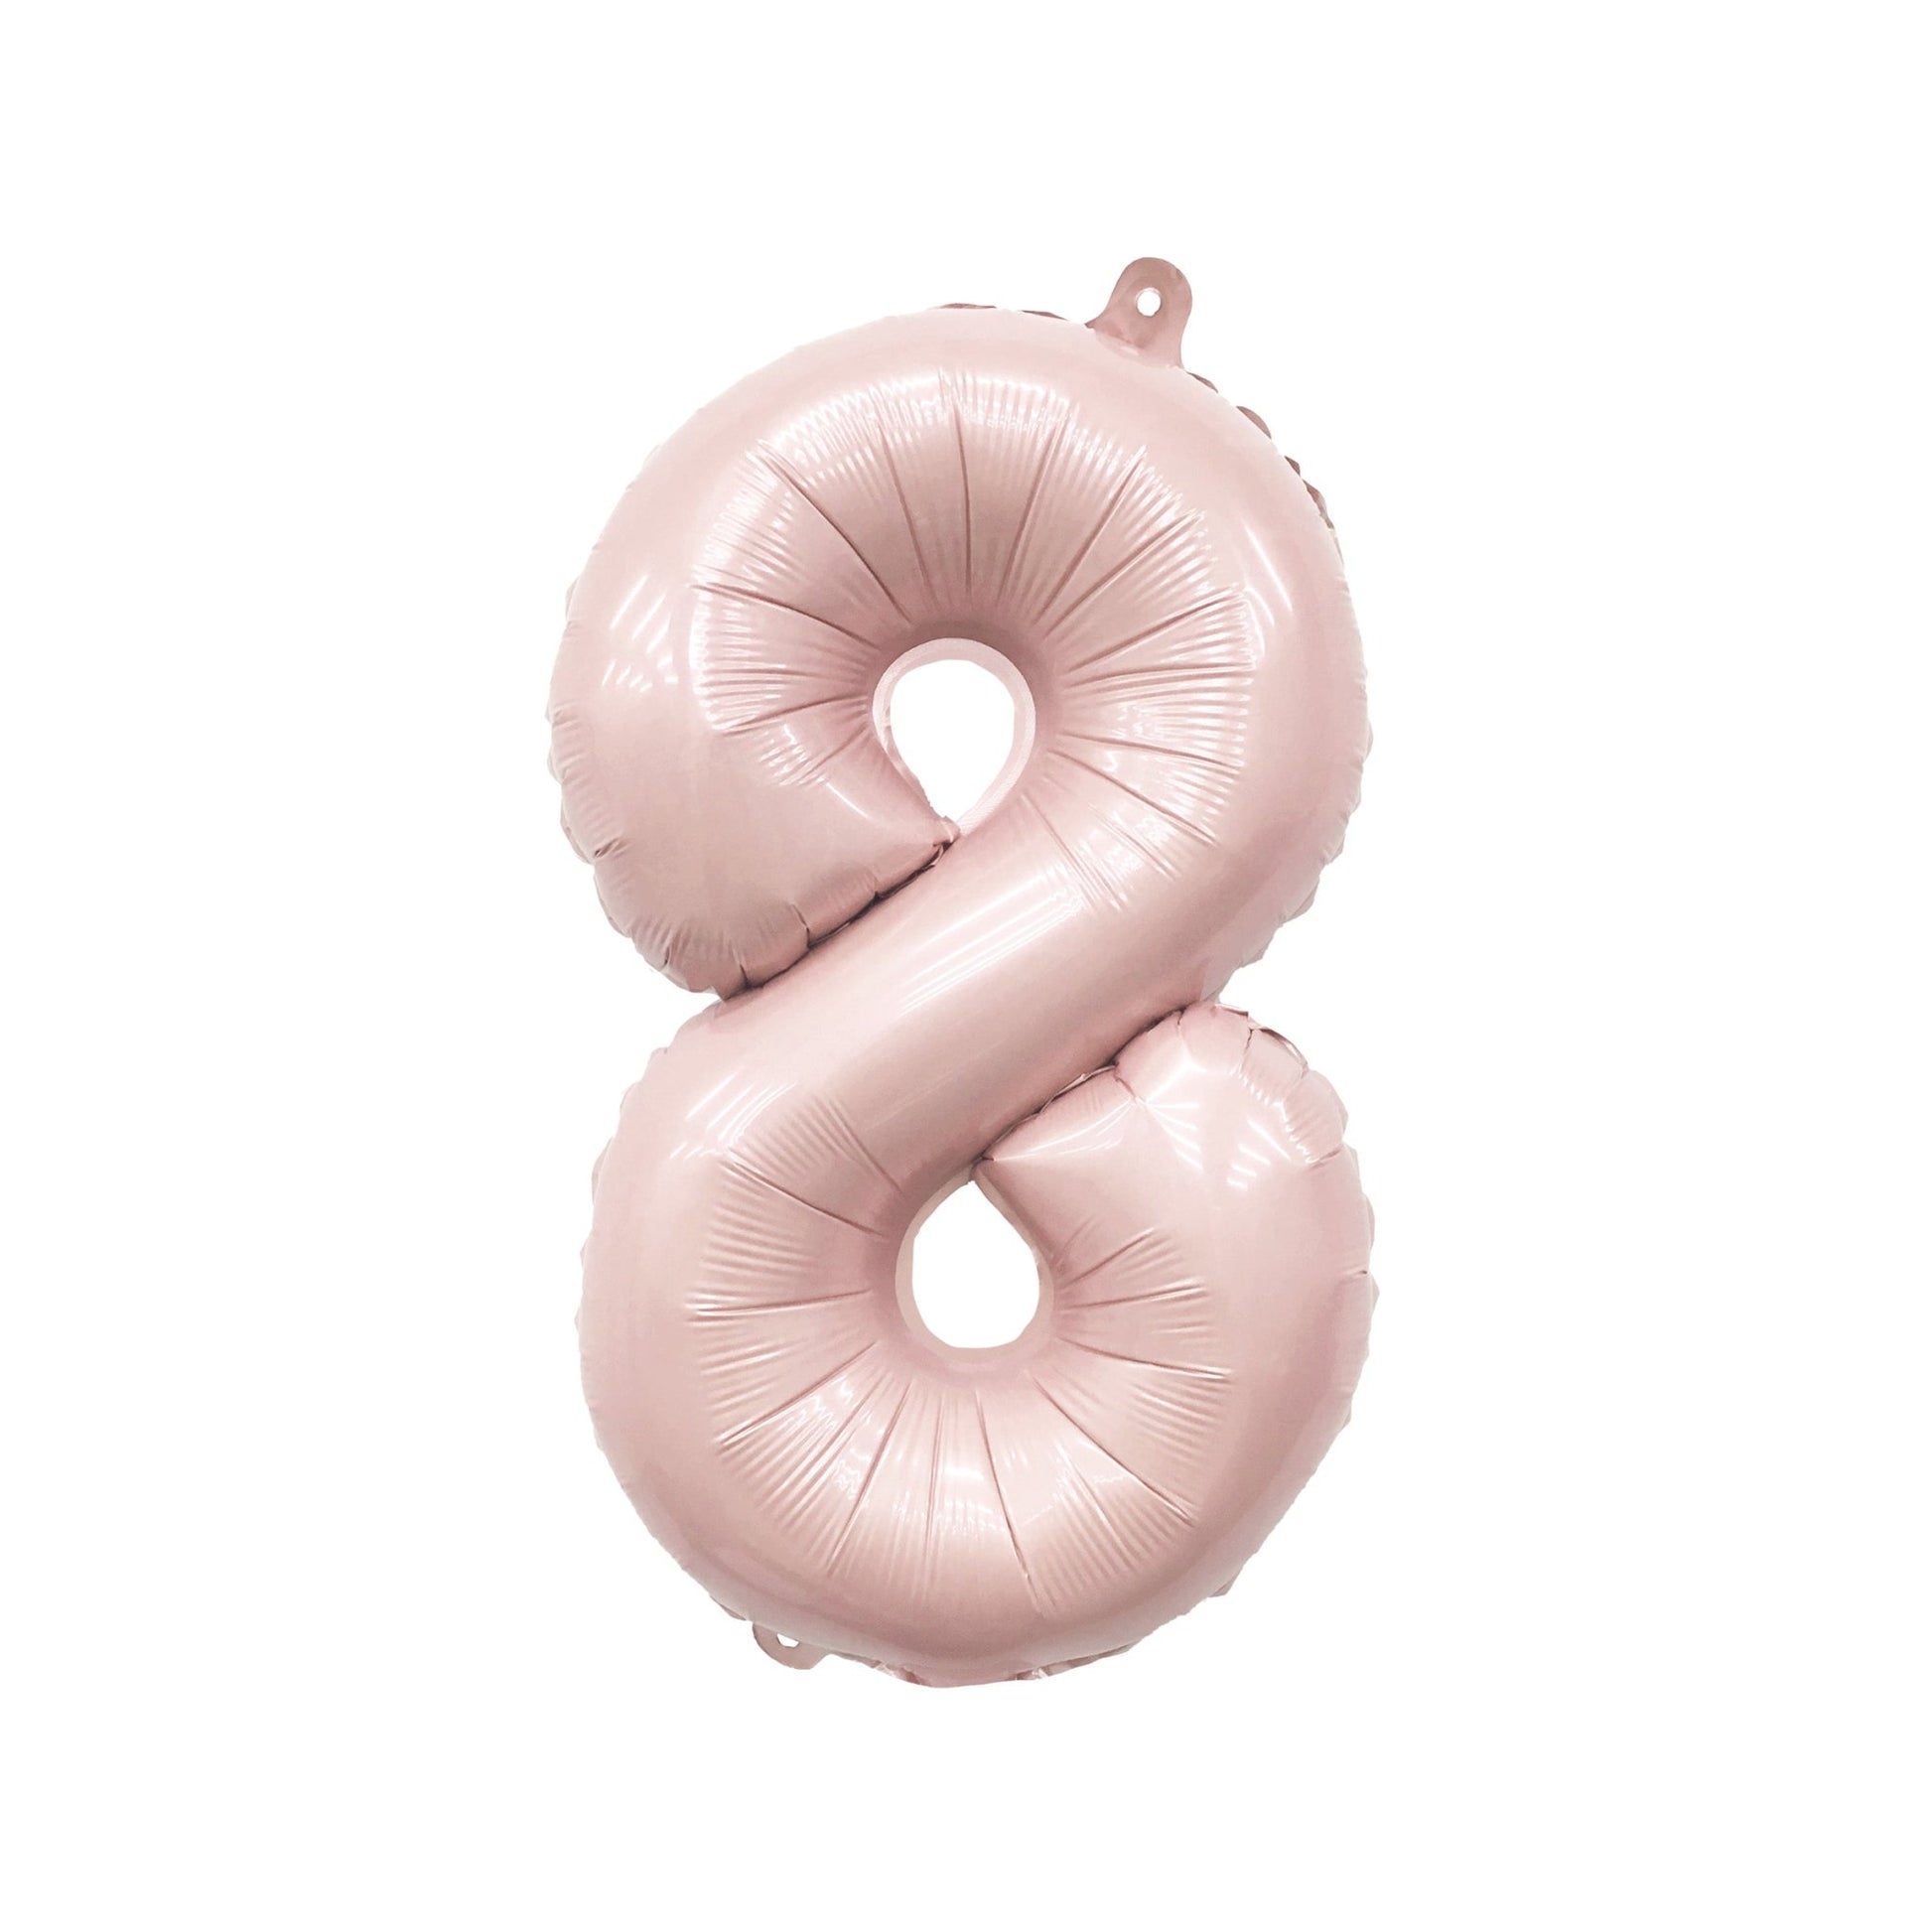 Barely Blush Mylar Number Balloons (32 Inches) - Ellie's Party Supply